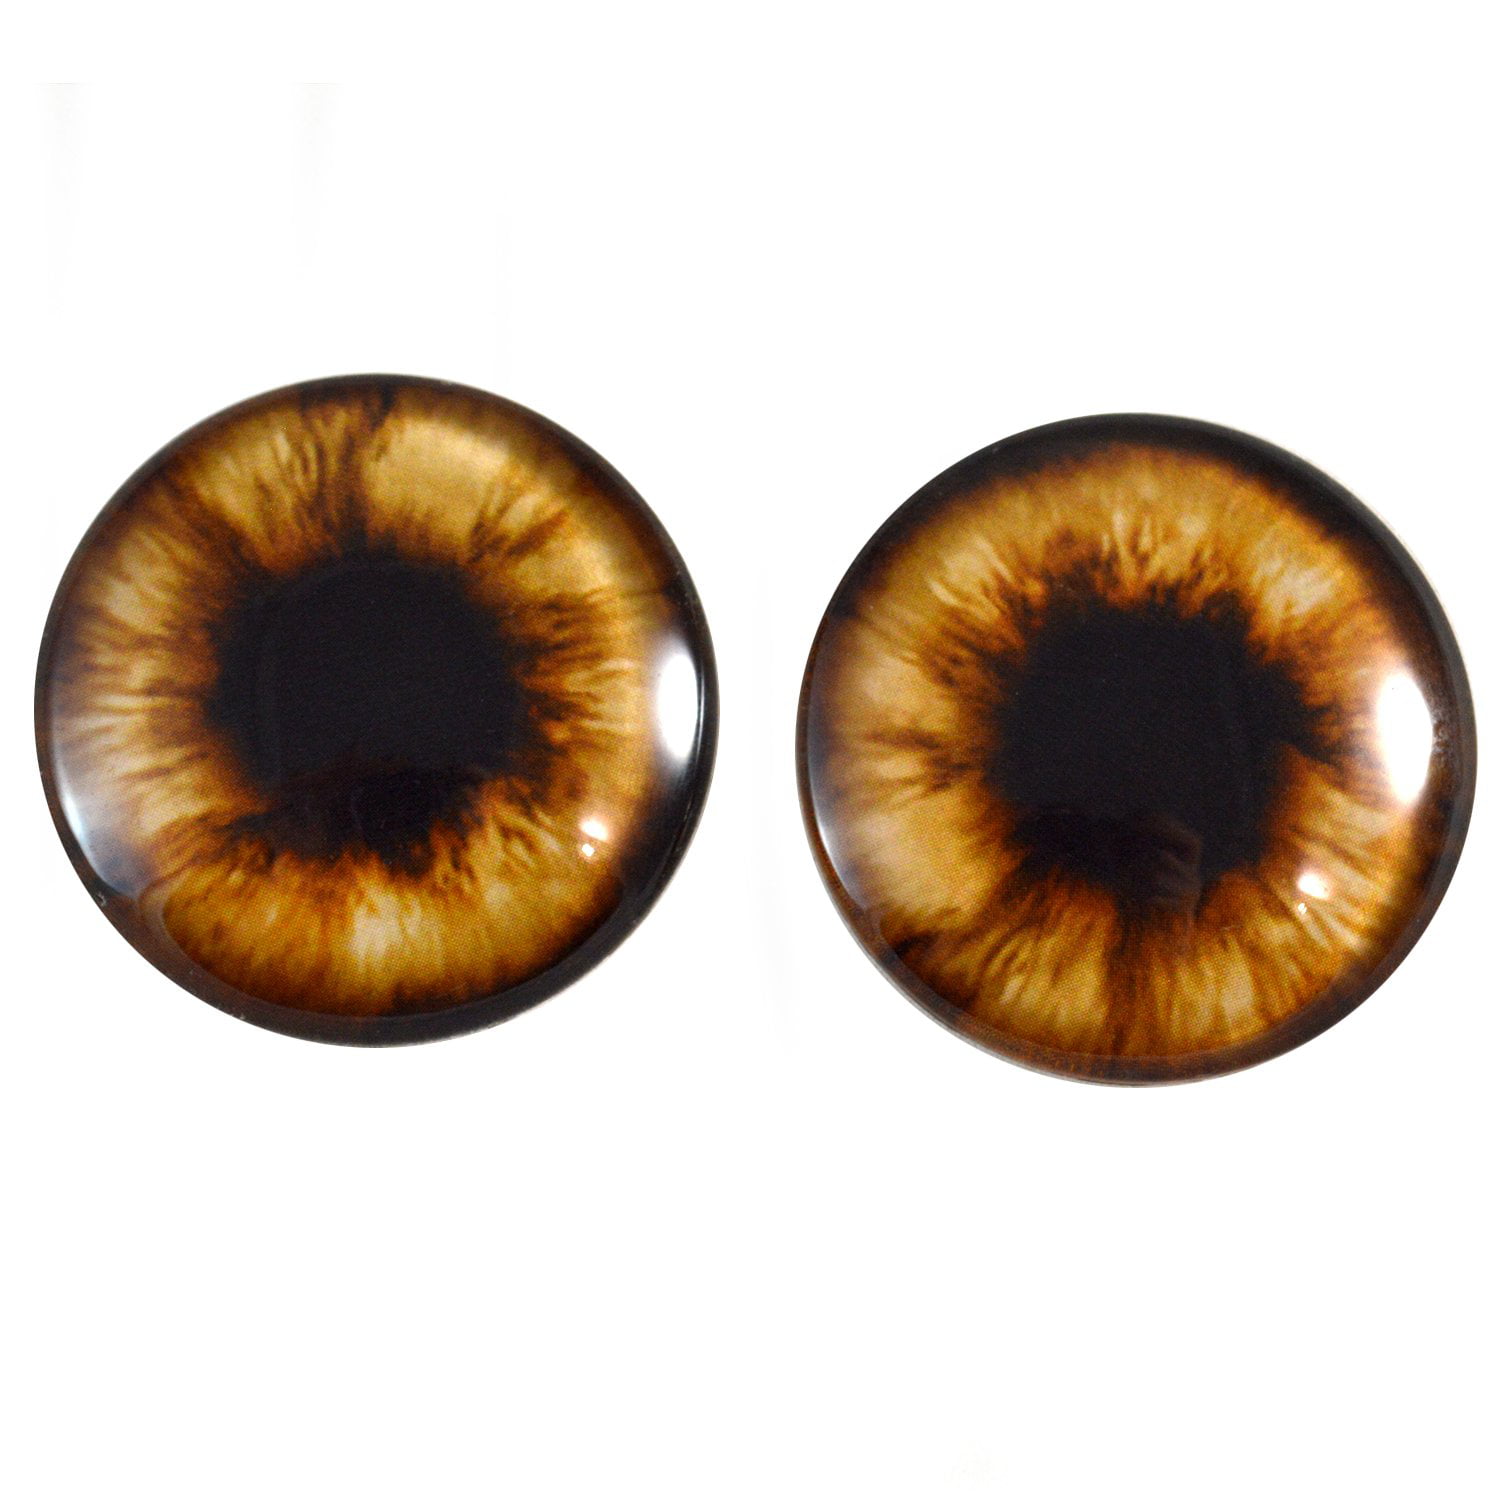 a pair vintage solid Glass Eyes size 12 mm teady bear taxidermy age 1910 Art A90 